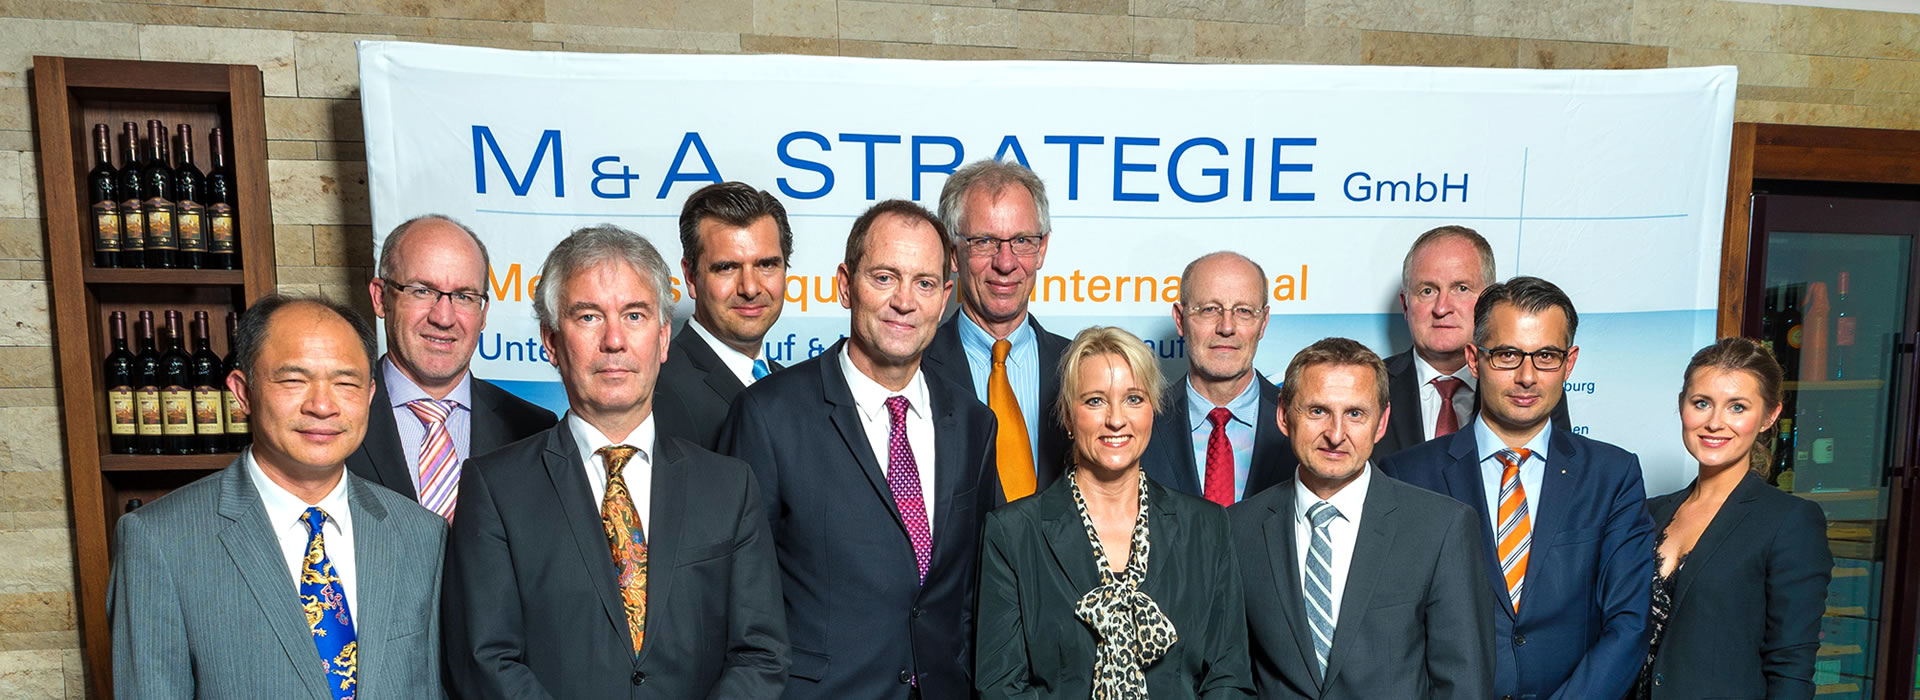 Consultants of M & A Strategie GmbH for Pre M & A and Post Merger Integration